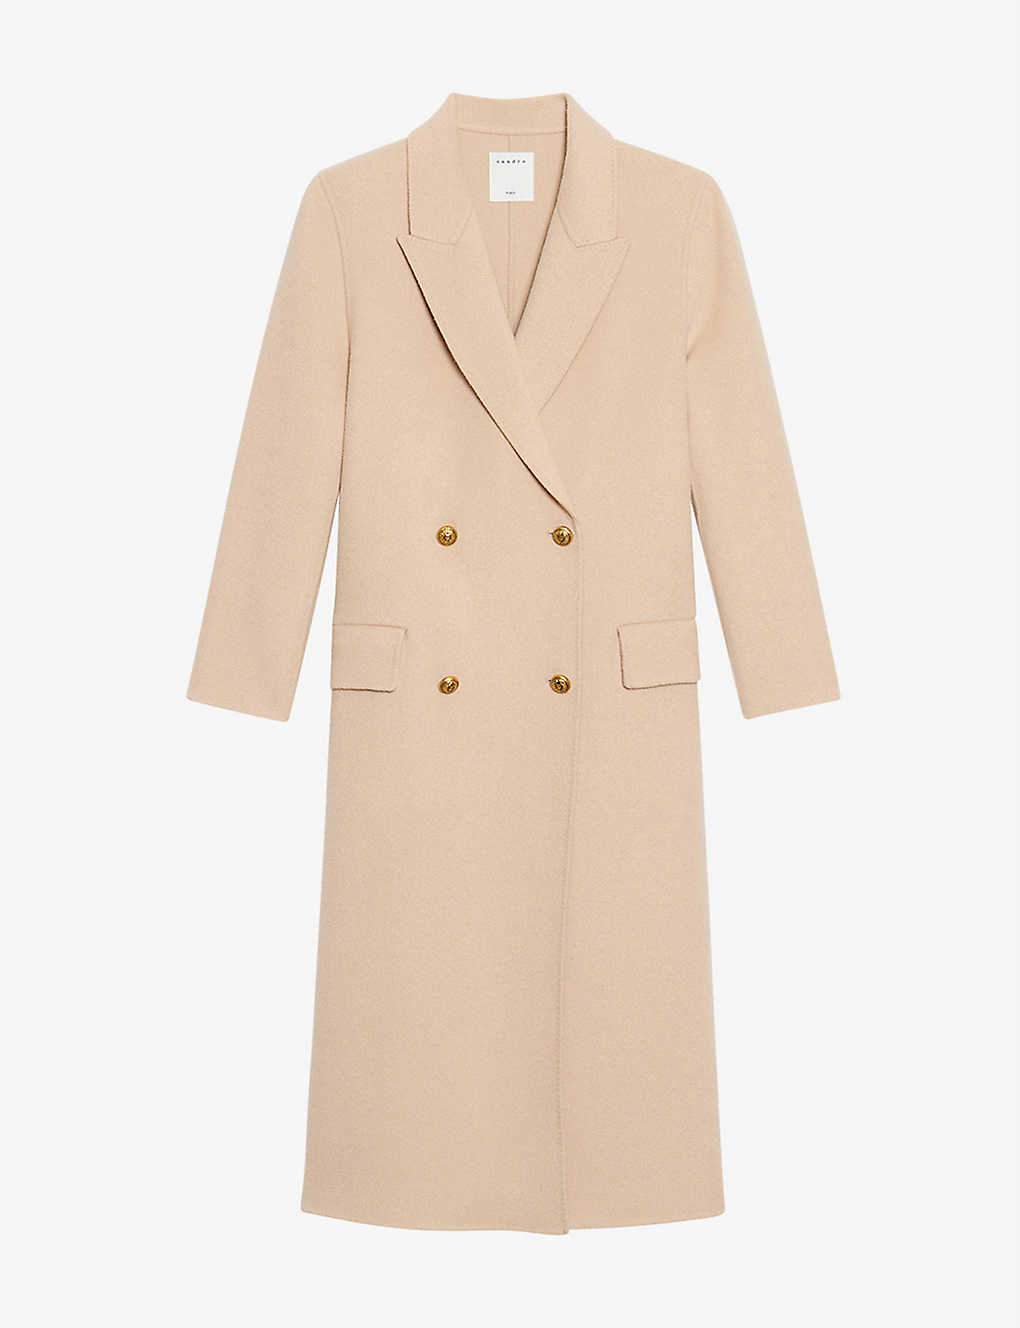 Mystere double-breasted wool coat(9421748)